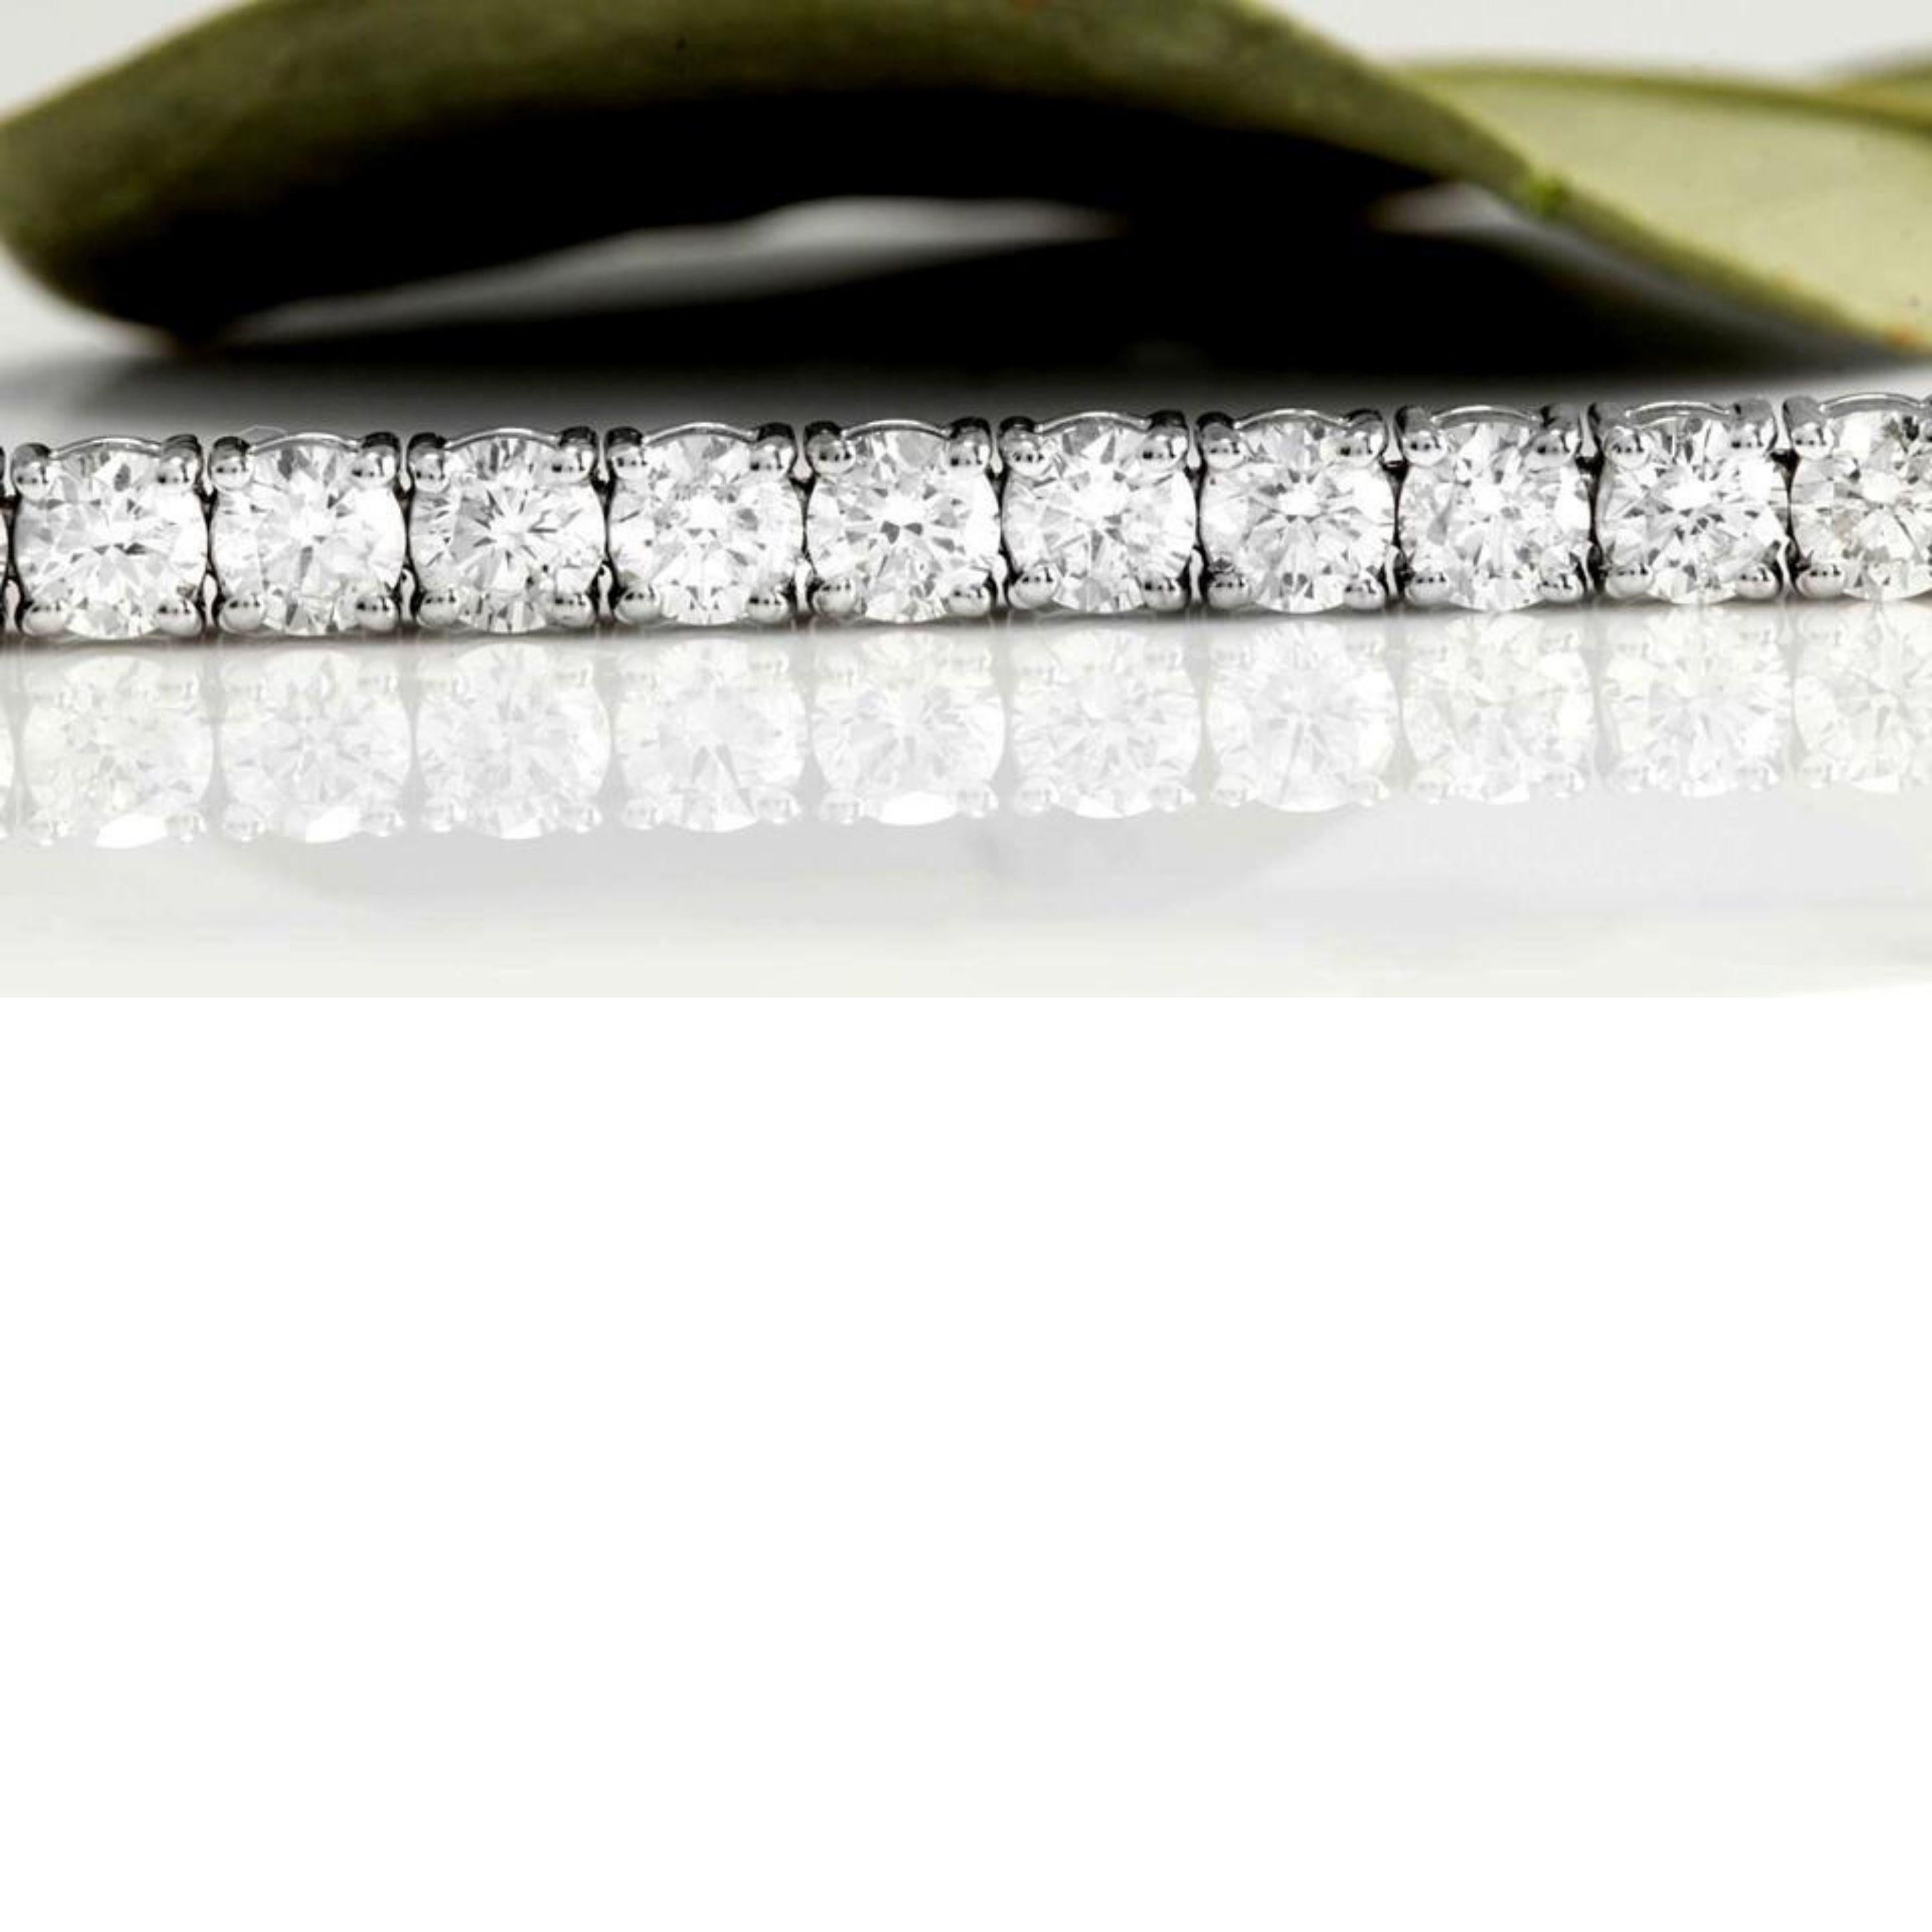 Very Impressive 3.35 Carats Natural Diamond 14K Solid White Gold Bracelet

STAMPED: 14K

Total Natural Round Diamonds Weight: Approx. 3.35 Carats (color G-H / Clarity SI1-SI2)

Bracelet Length is: 7 inches

Width: 2.45mm

Bracelet total weight: